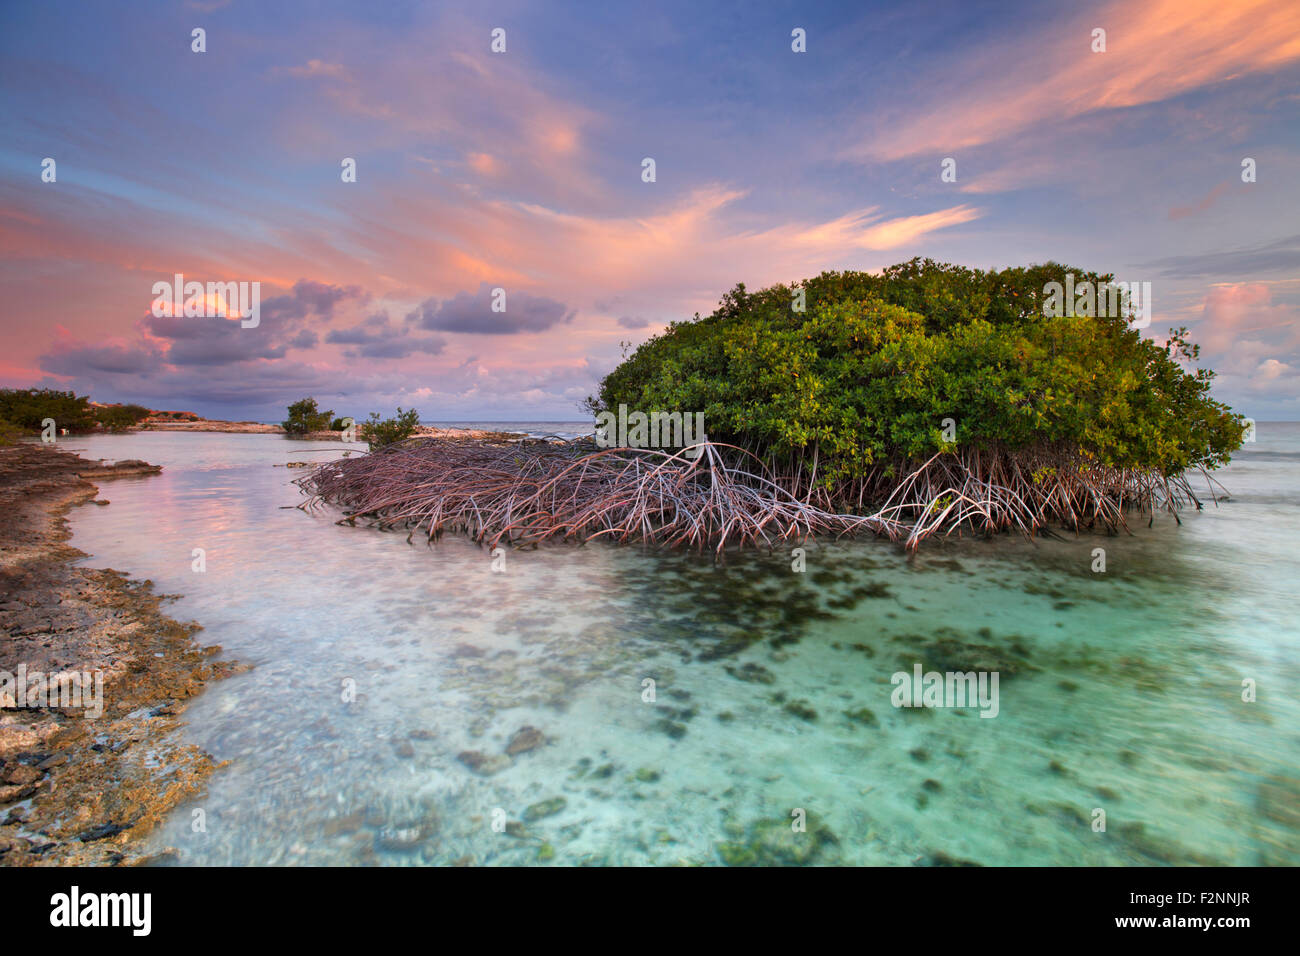 Mangrove trees in a tropical lagoon on the island of Curaçao, Netherlands Antilles. Photographed at sunset. Stock Photo